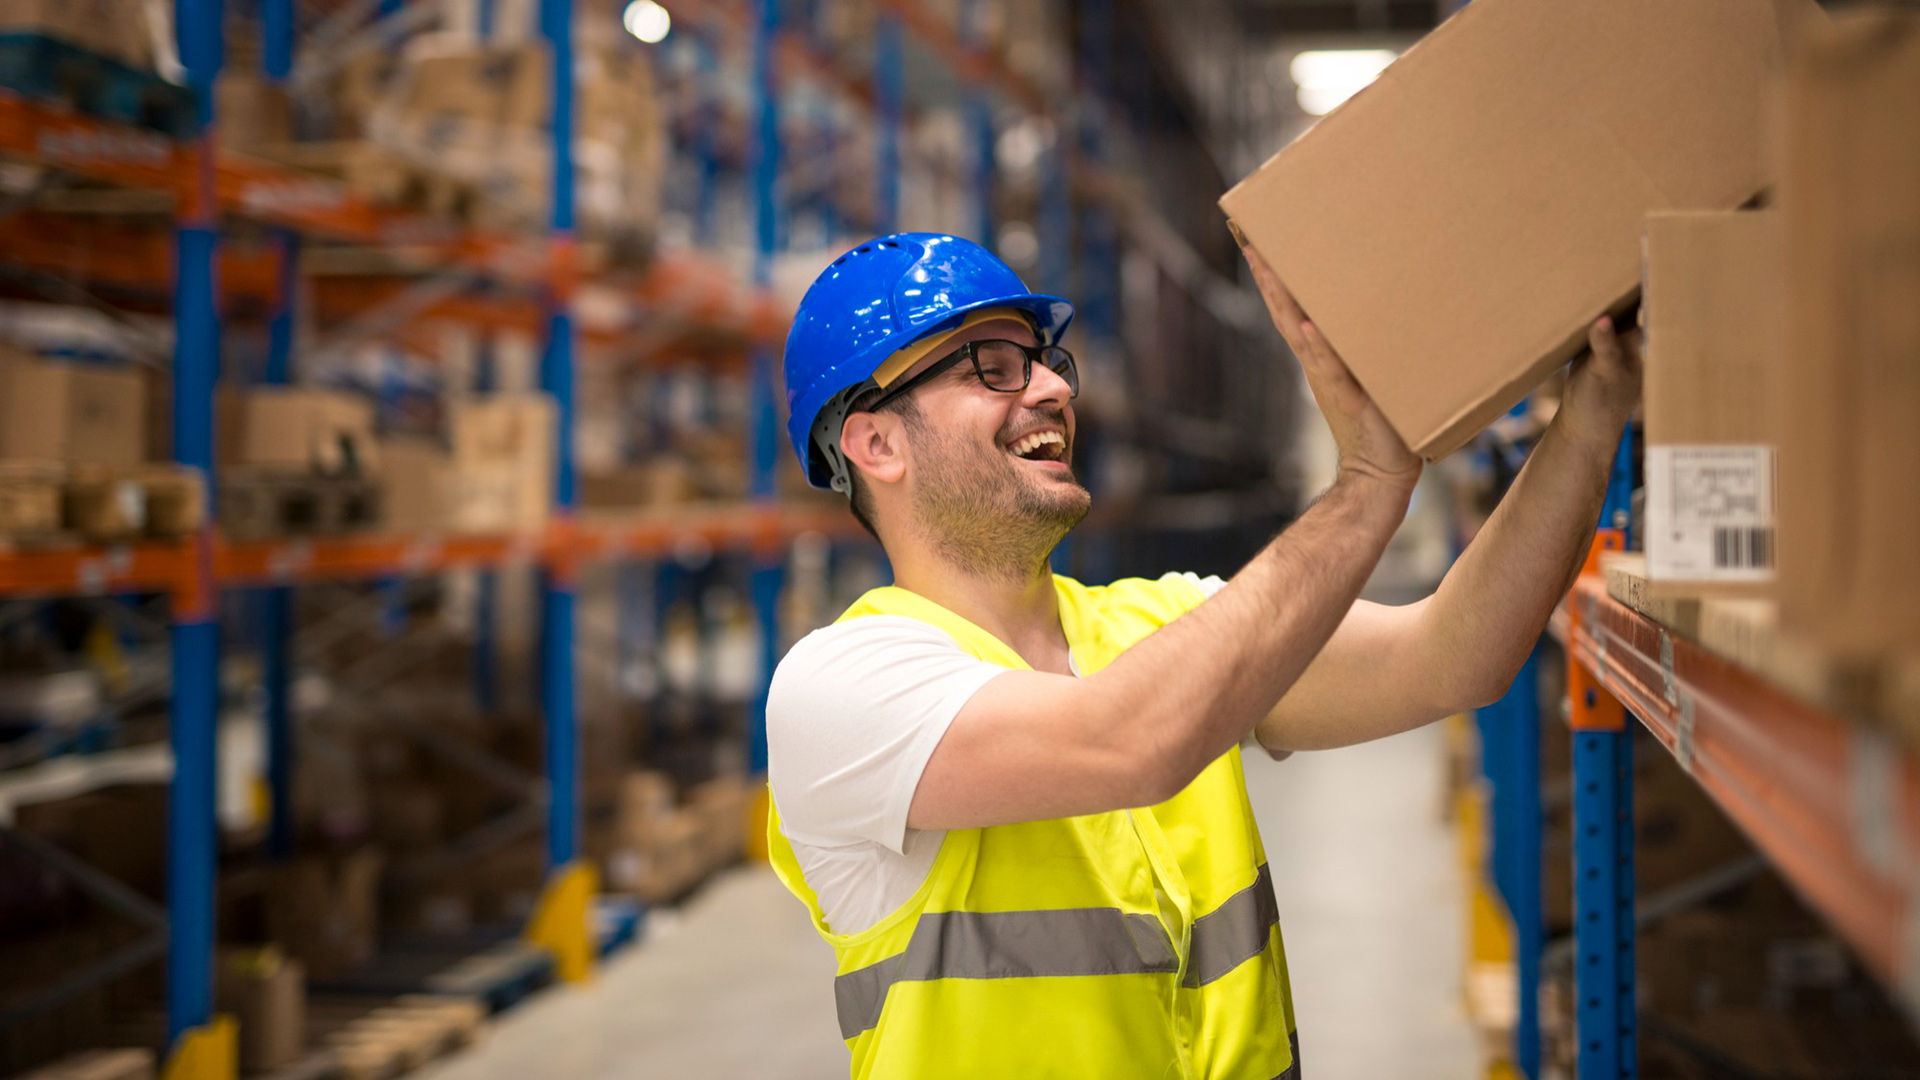 smiling-warehouse-worker-moving-boxes-shelf